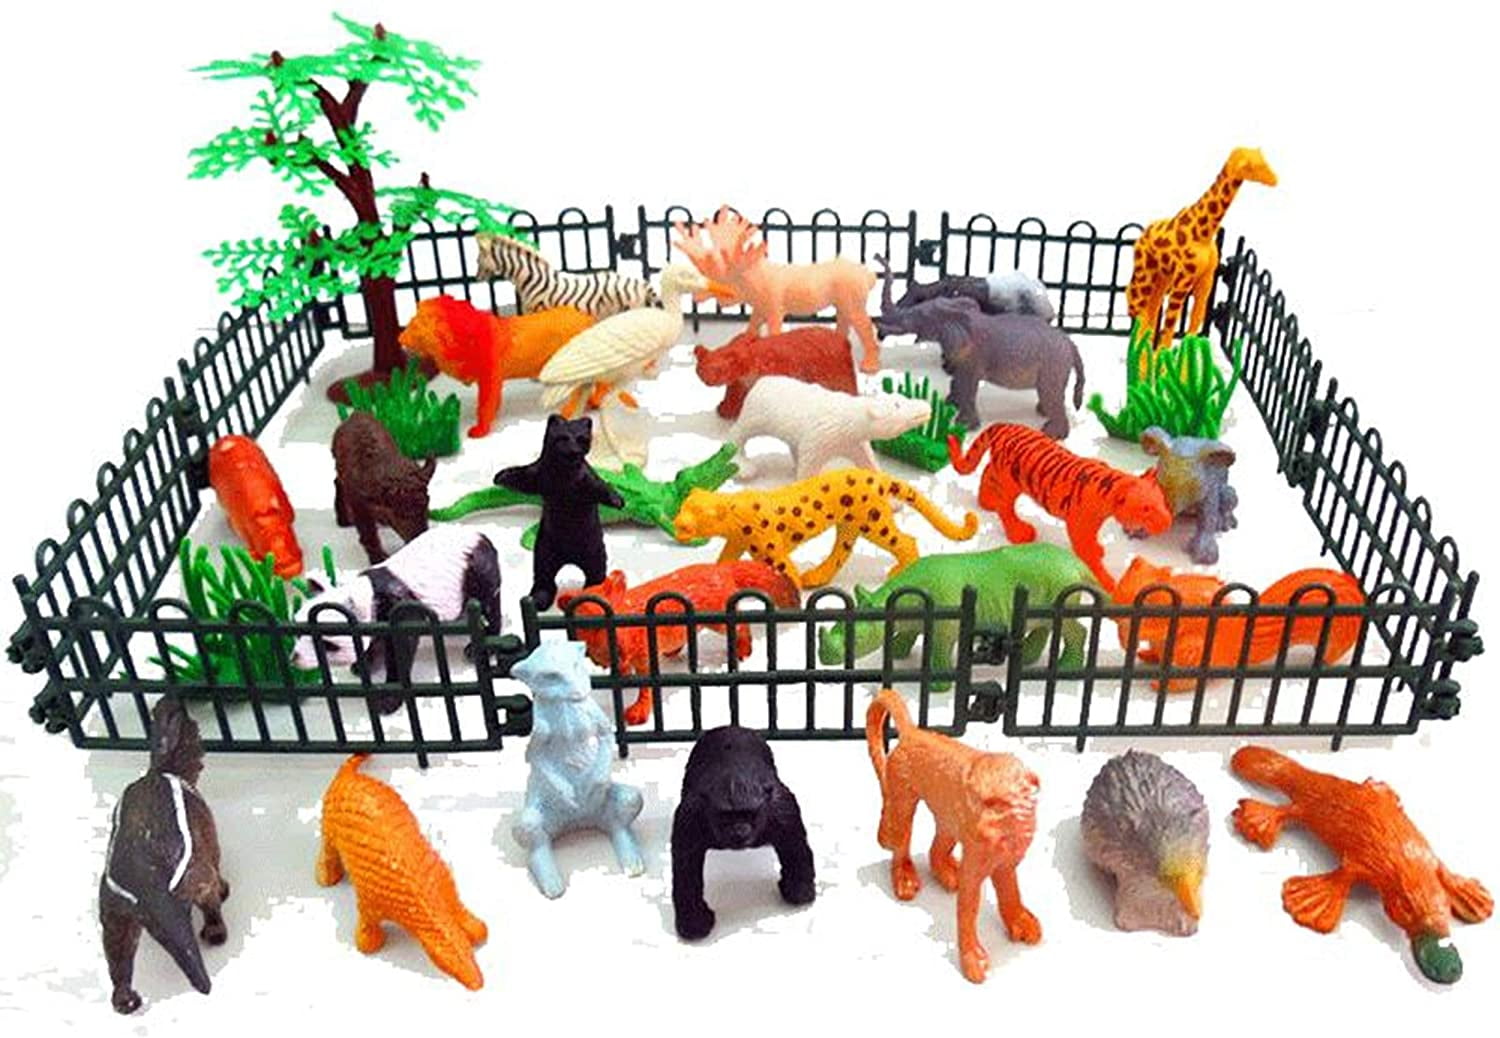 Plastic Wild Magical Creature Animal Model Figure Kids Learning Toy Ornament 